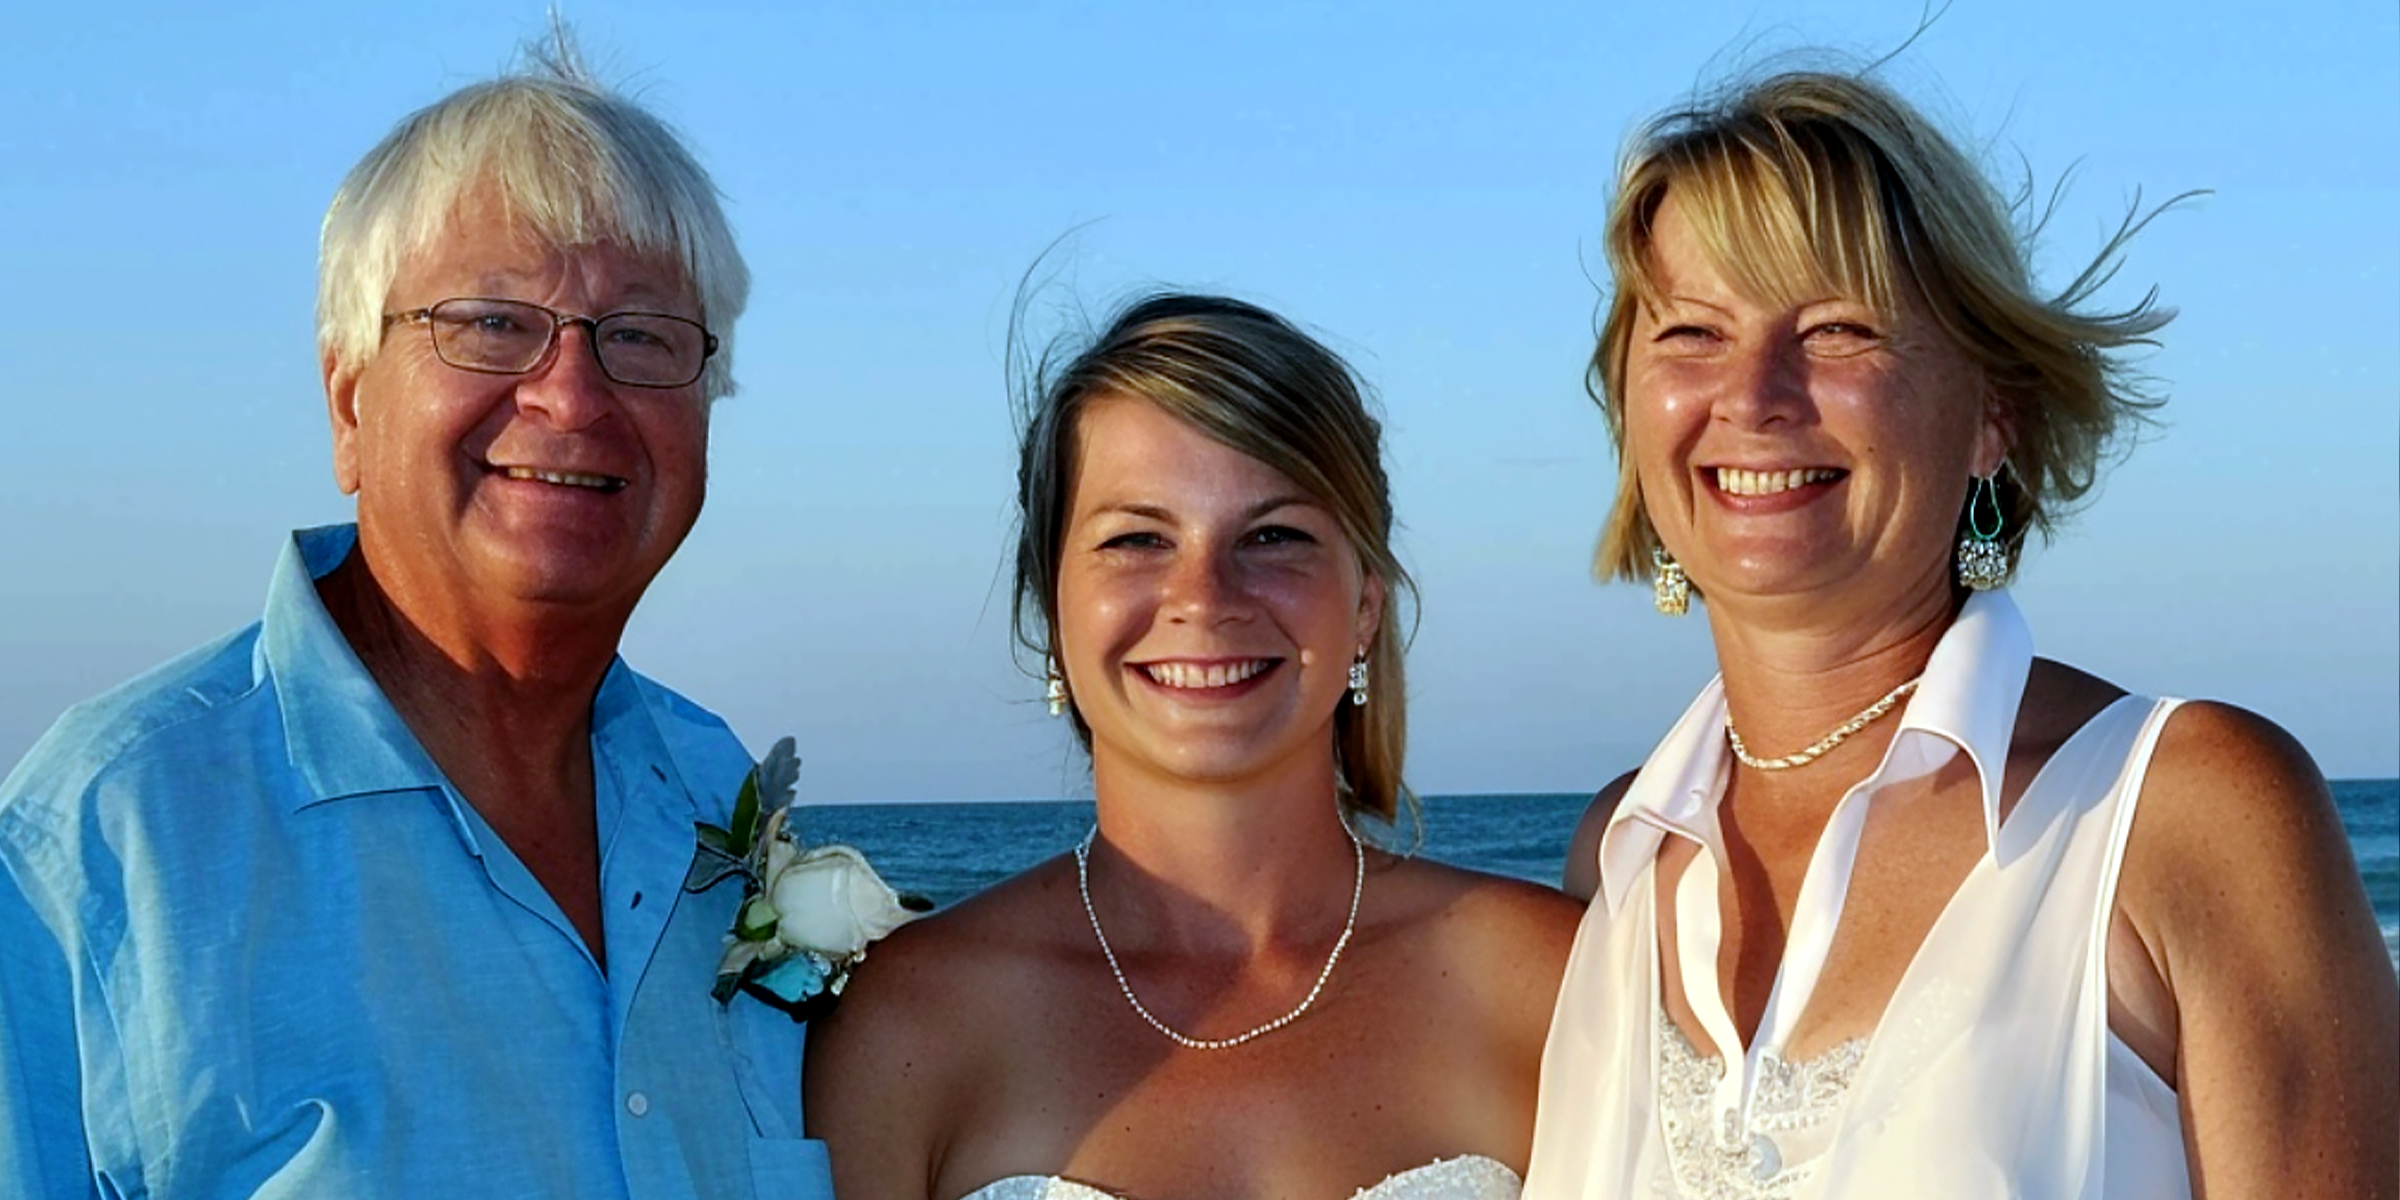 A bride with her parents | Source: Amomama